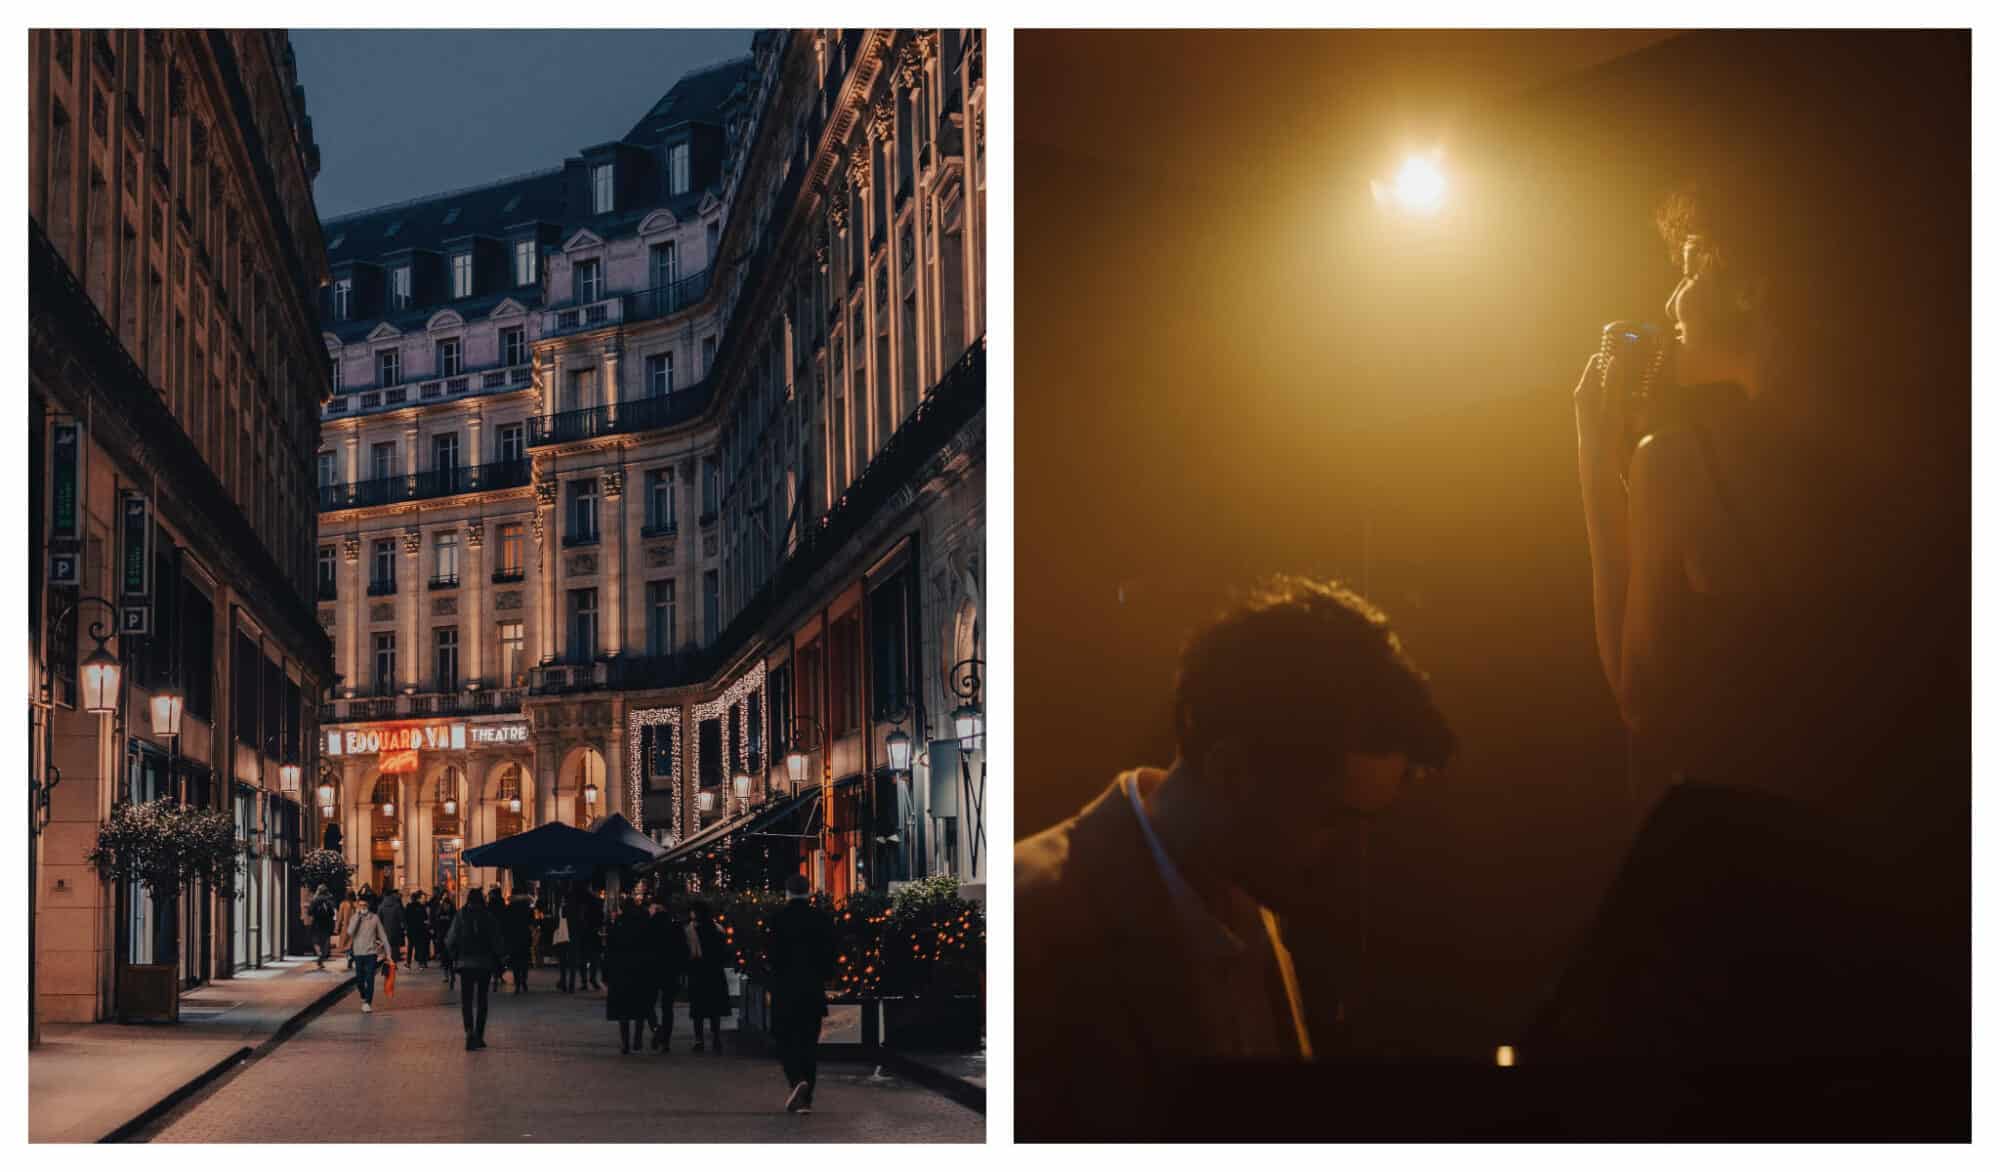 Top: A woman in a black dress sits on a stool and sings into an old-style microphone in a dimly lit music club. There is a man playing the piano on the left and two men playing a saxophone and bass guitar.
Above: Left: A view of a nicely lit Parisian street at twilight, people filling the street. Right: A woman sings into an old style mic, the bright spotlight illuminating the haze around her. There is a man looking down at music as he plays the piano.